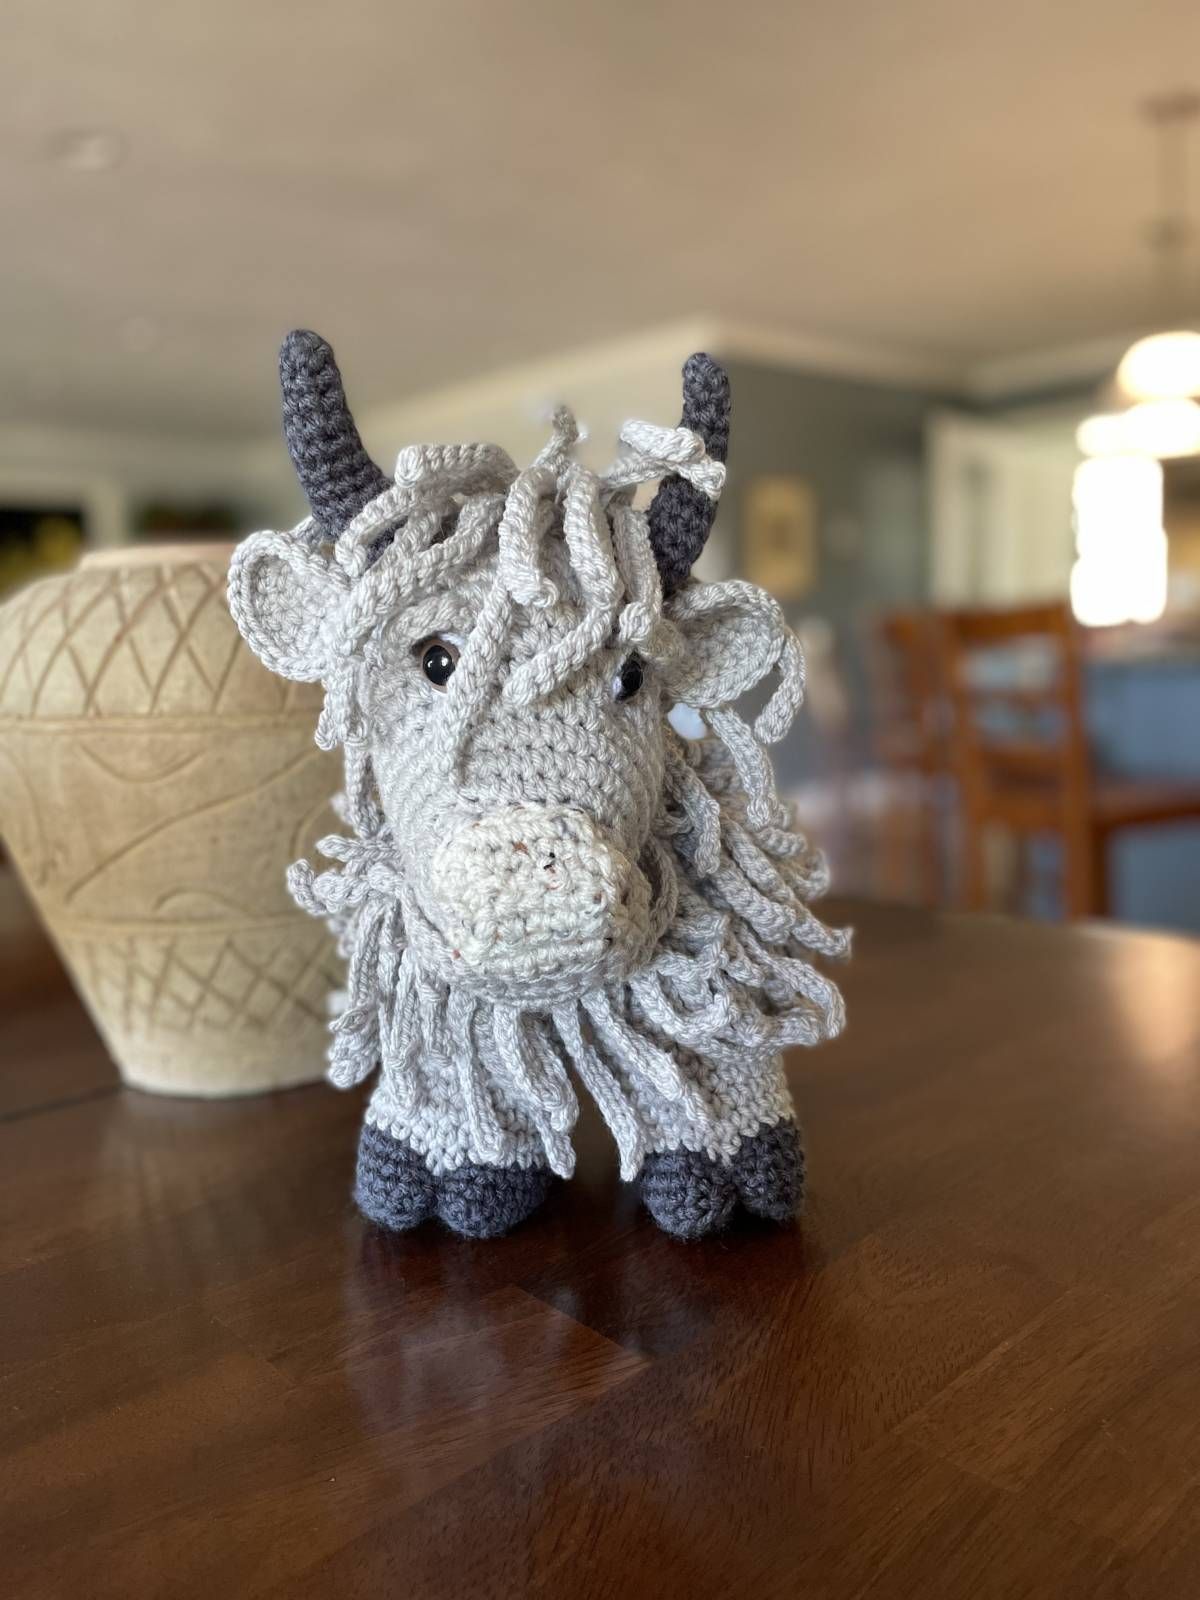 Amigurumi Crochet Highland Cow Pattern Review by Jette Cochran for Cottontail Whiskers